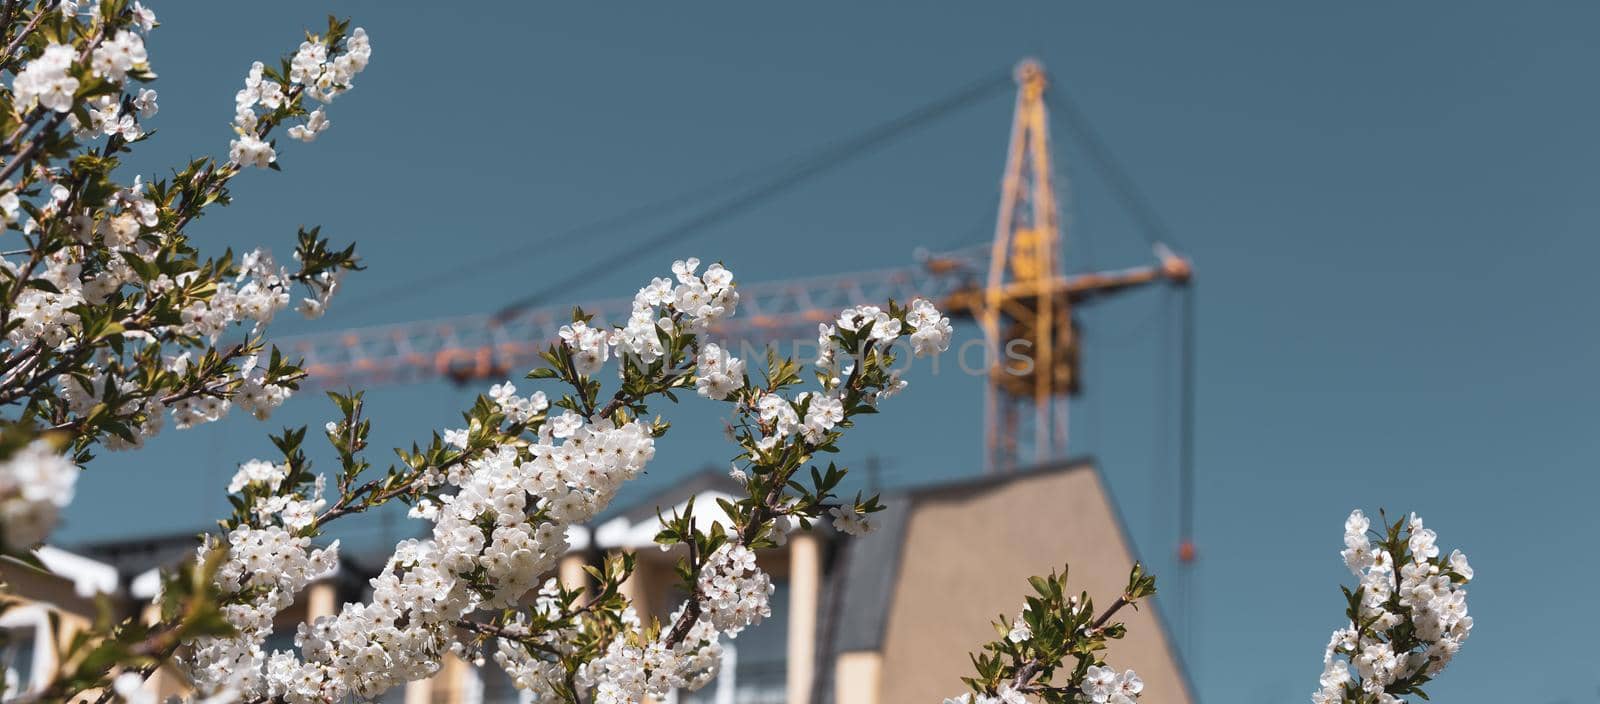 Spring and new house construction concept. Construction crane with a spring flowering trees and blue sky on a sunny day